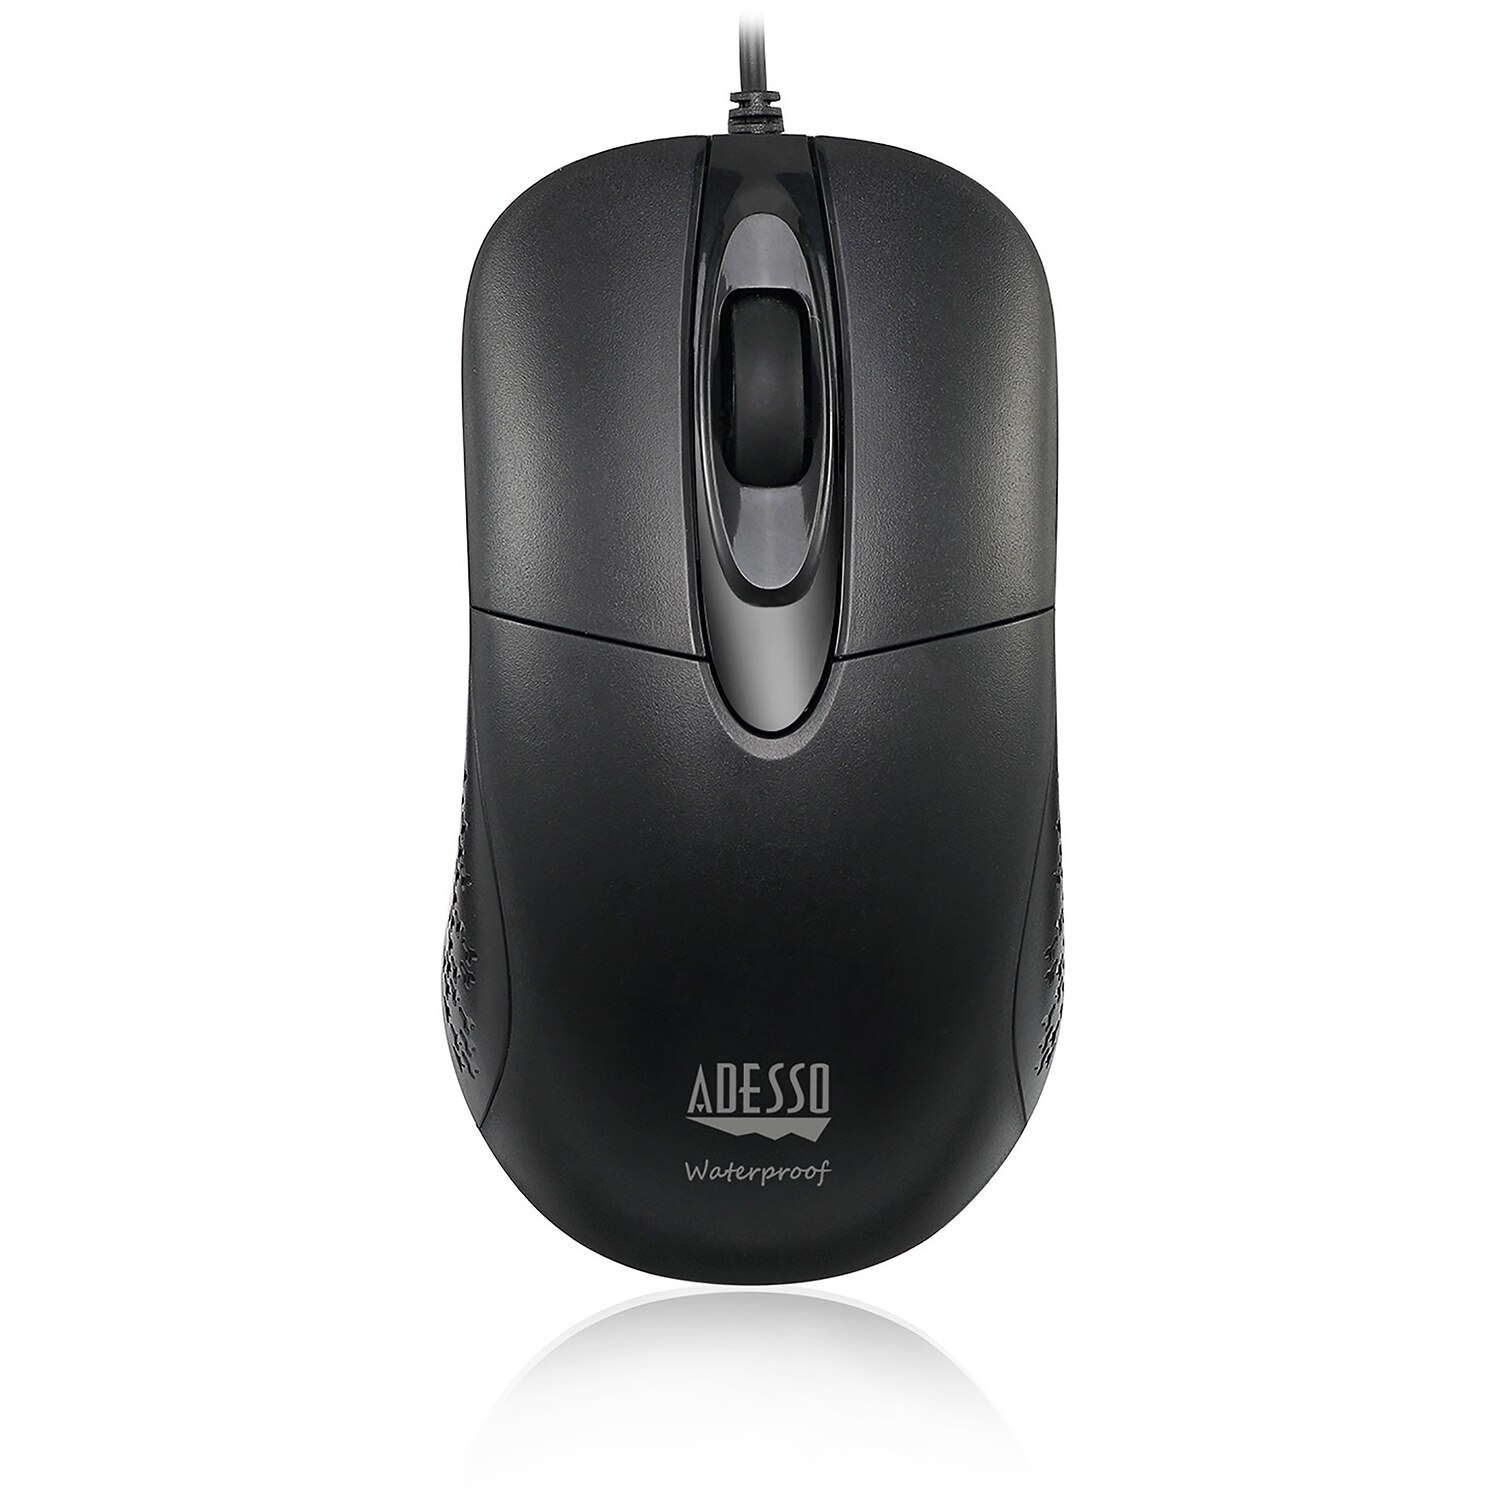 Adesso Antimicrobial Waterproof Mouse